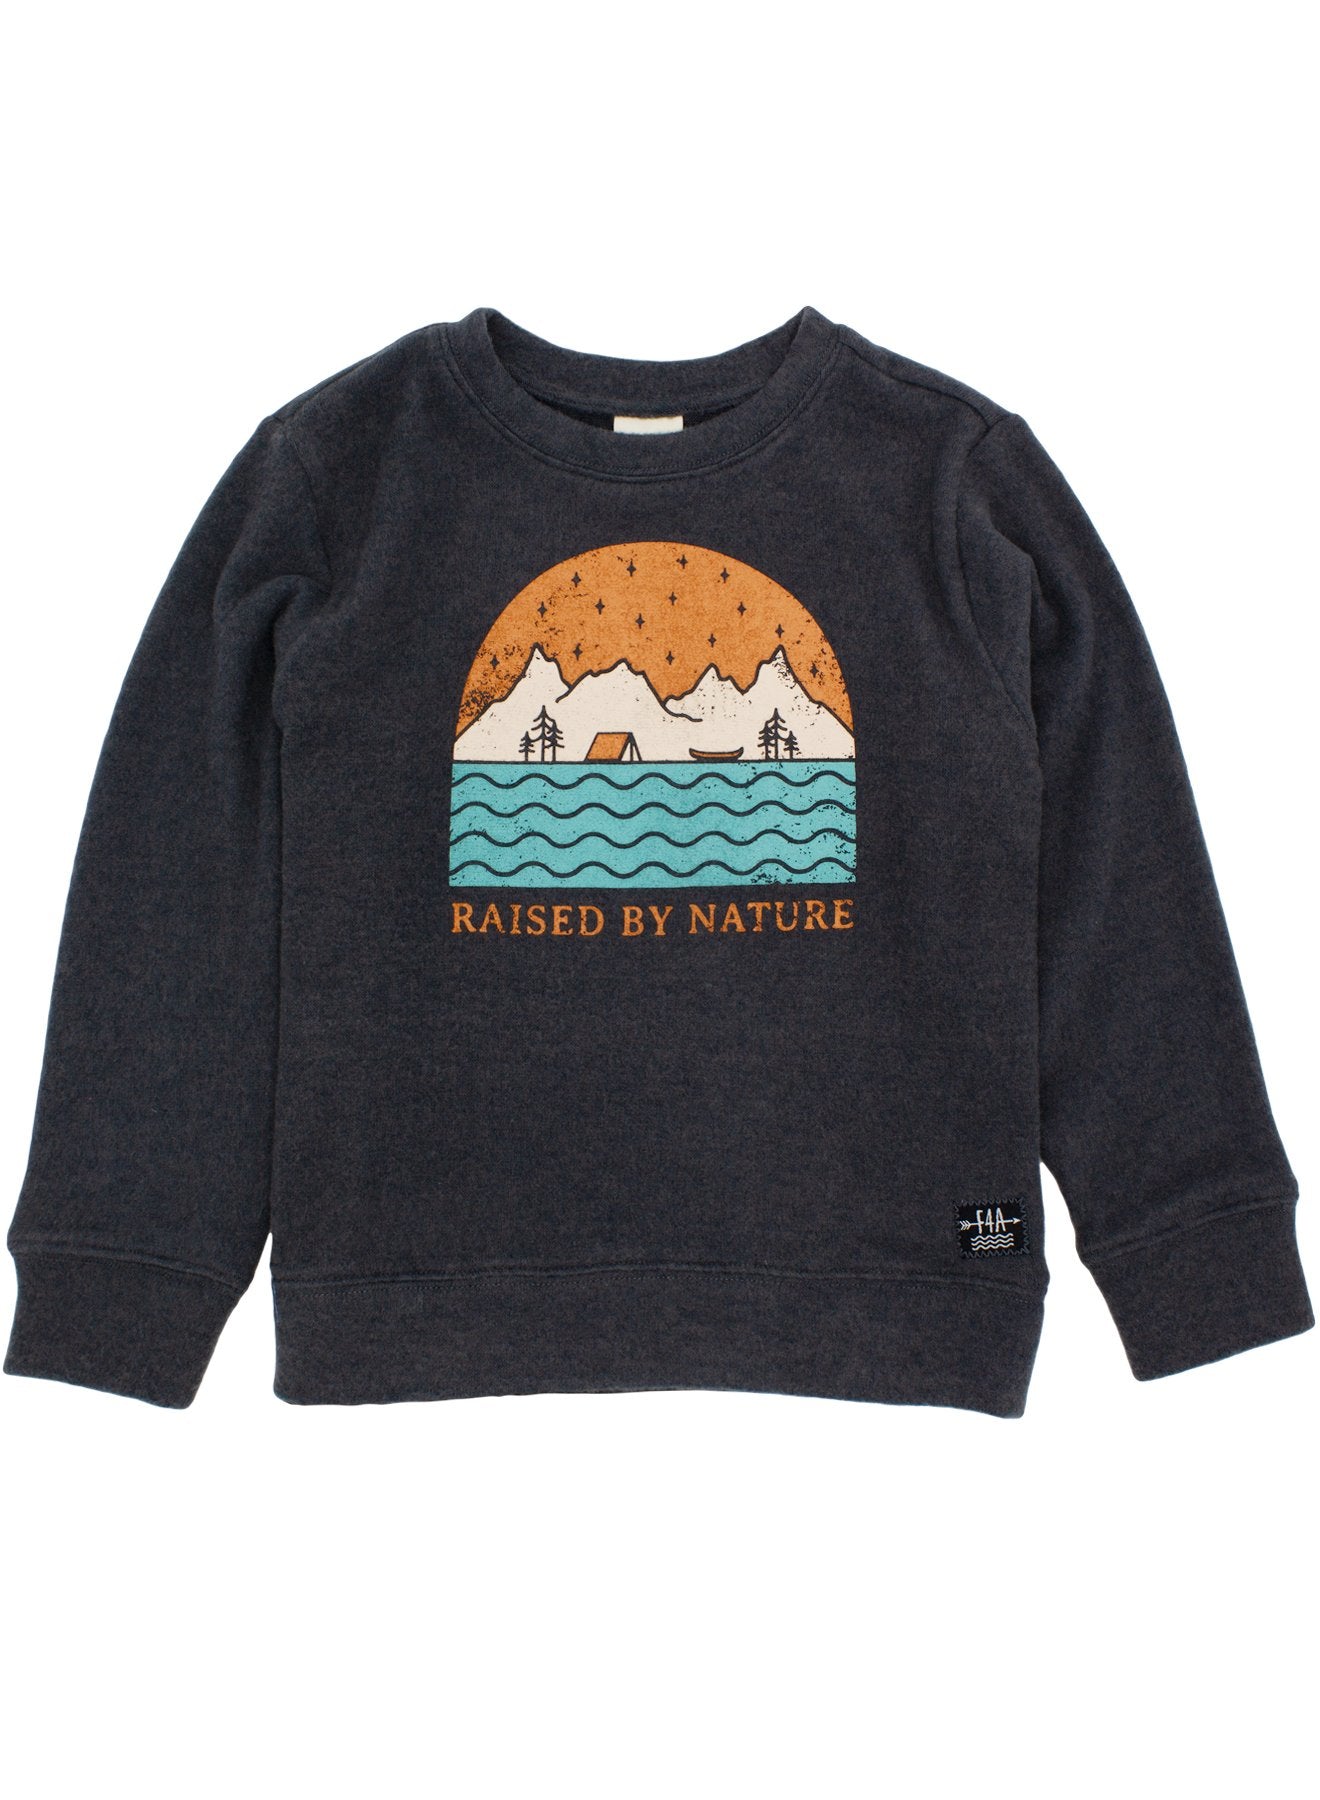 Raised by Nature Coastal Pullover  - Doodlebug's Children's Boutique